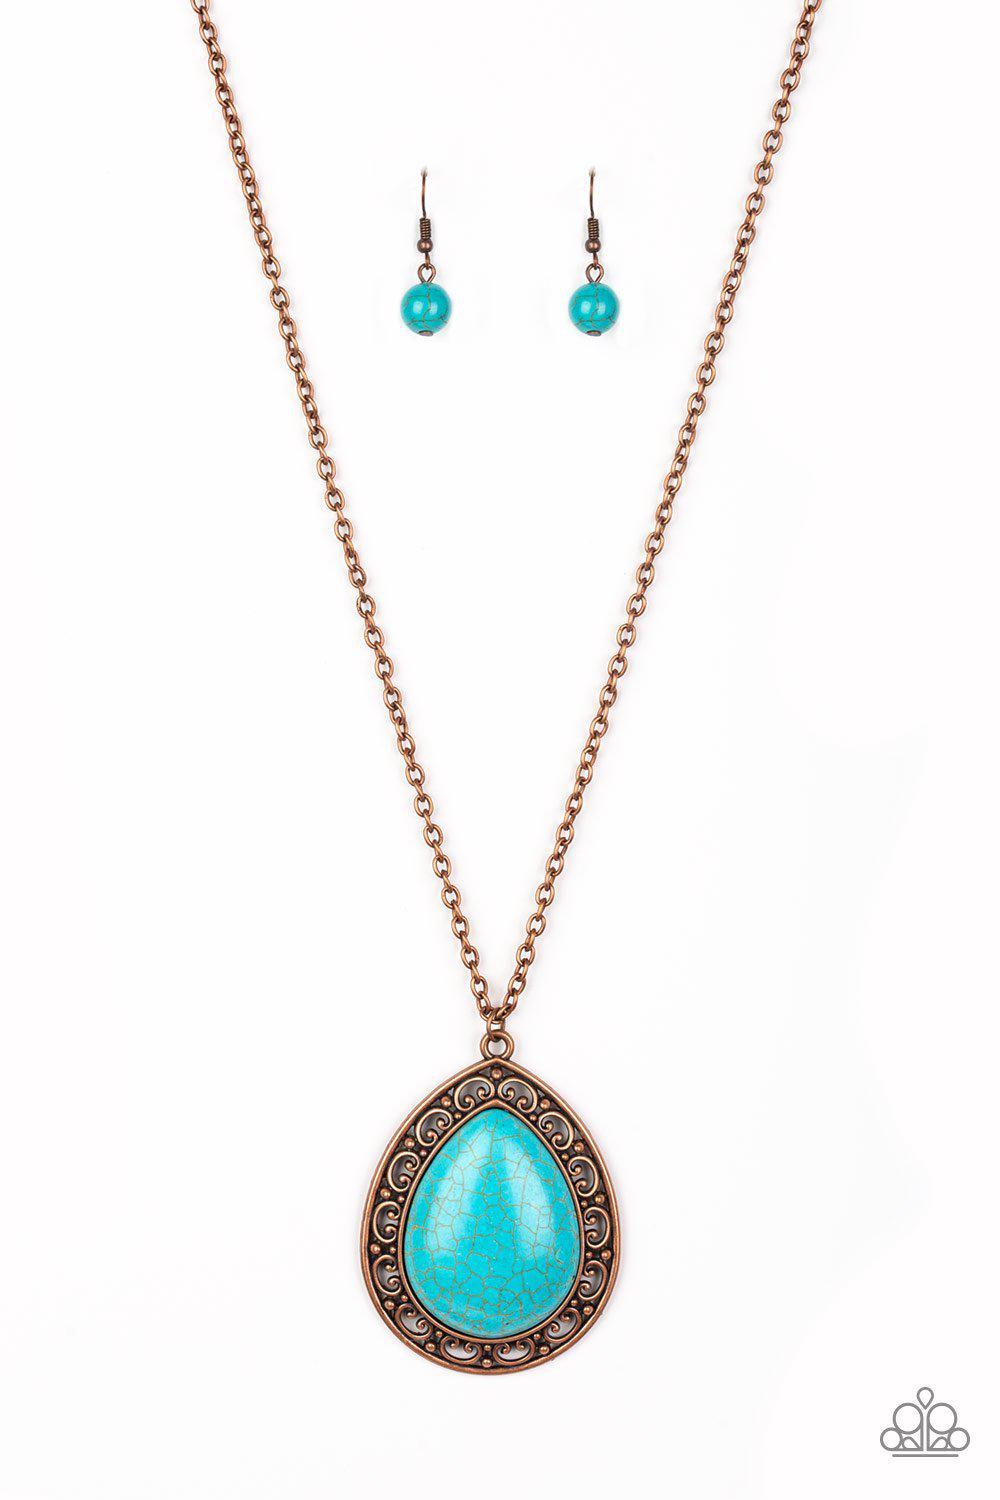 Full Frontier Copper and Turquoise Blue Stone Teardrop Necklace - Paparazzi Accessories- lightbox - CarasShop.com - $5 Jewelry by Cara Jewels